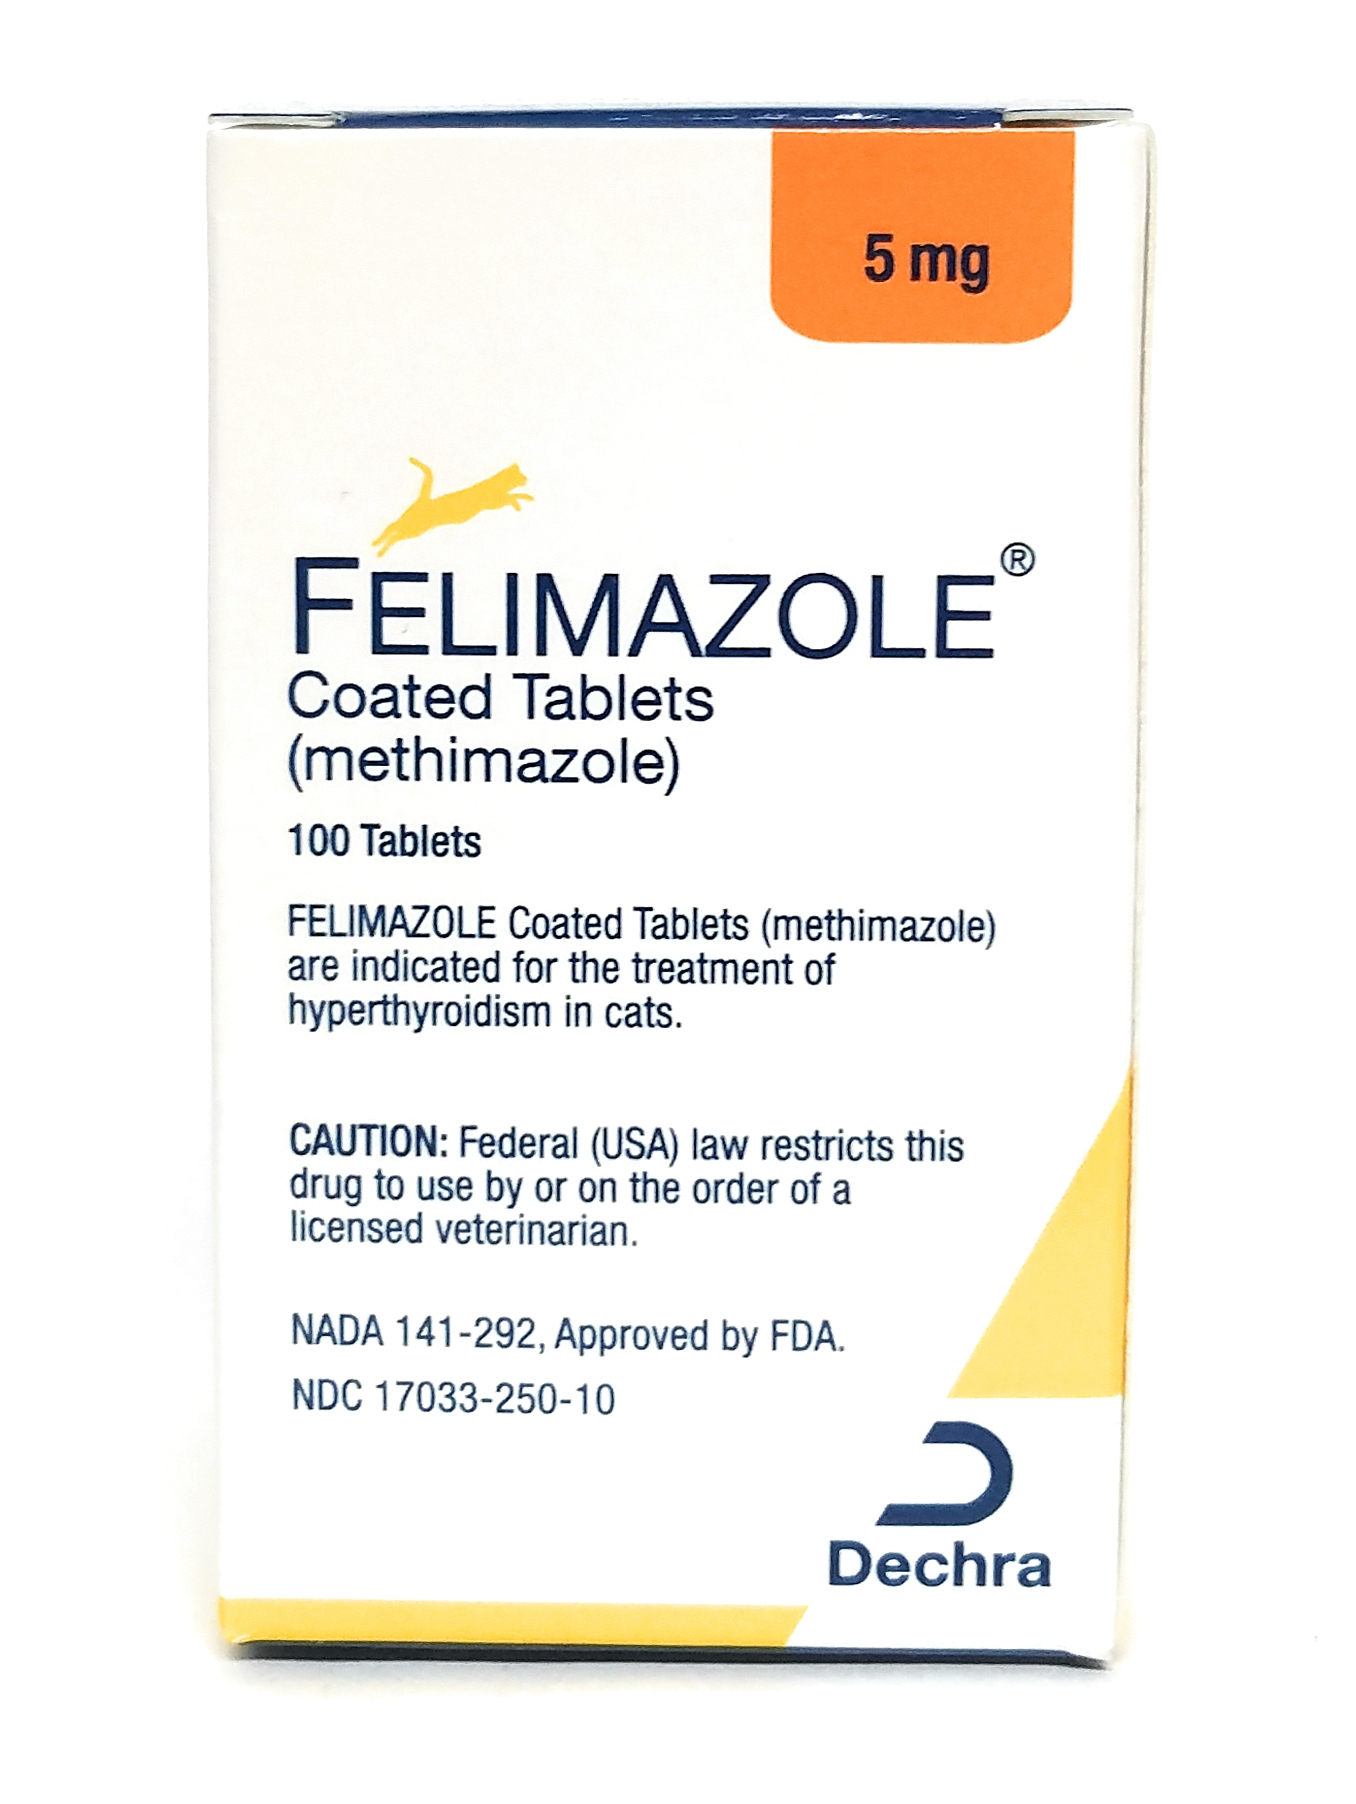 Vet Approved Rx Felimazole Methimazole 5mg Tablet 100 Count for Pets